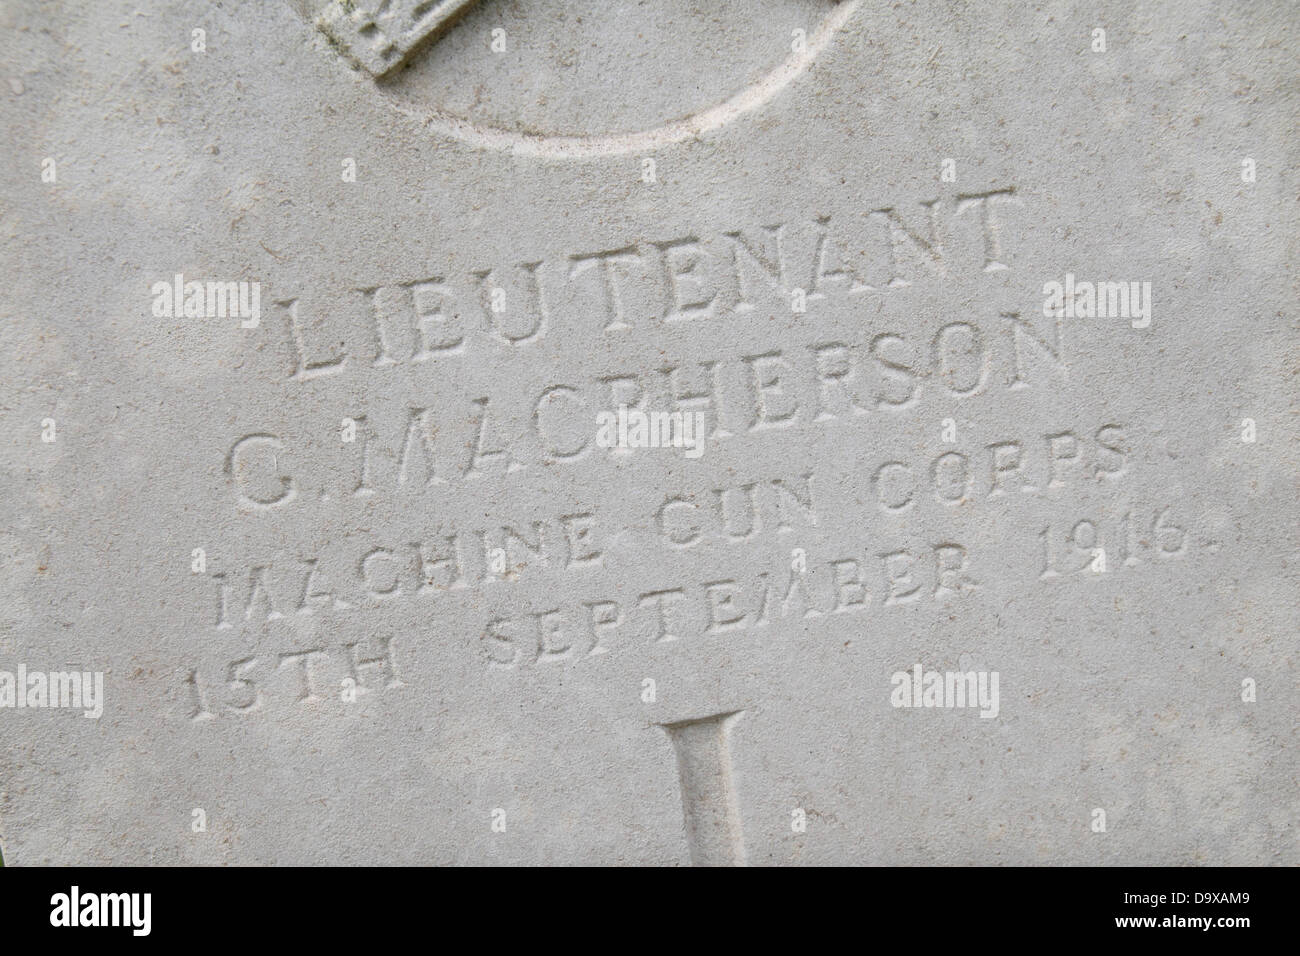 Grave of Lt G MacPherson in the CWGC Grove Town British Cemetery (or Grove Town Cemetery) , Meaulte, Somme, Picardy, France. Stock Photo